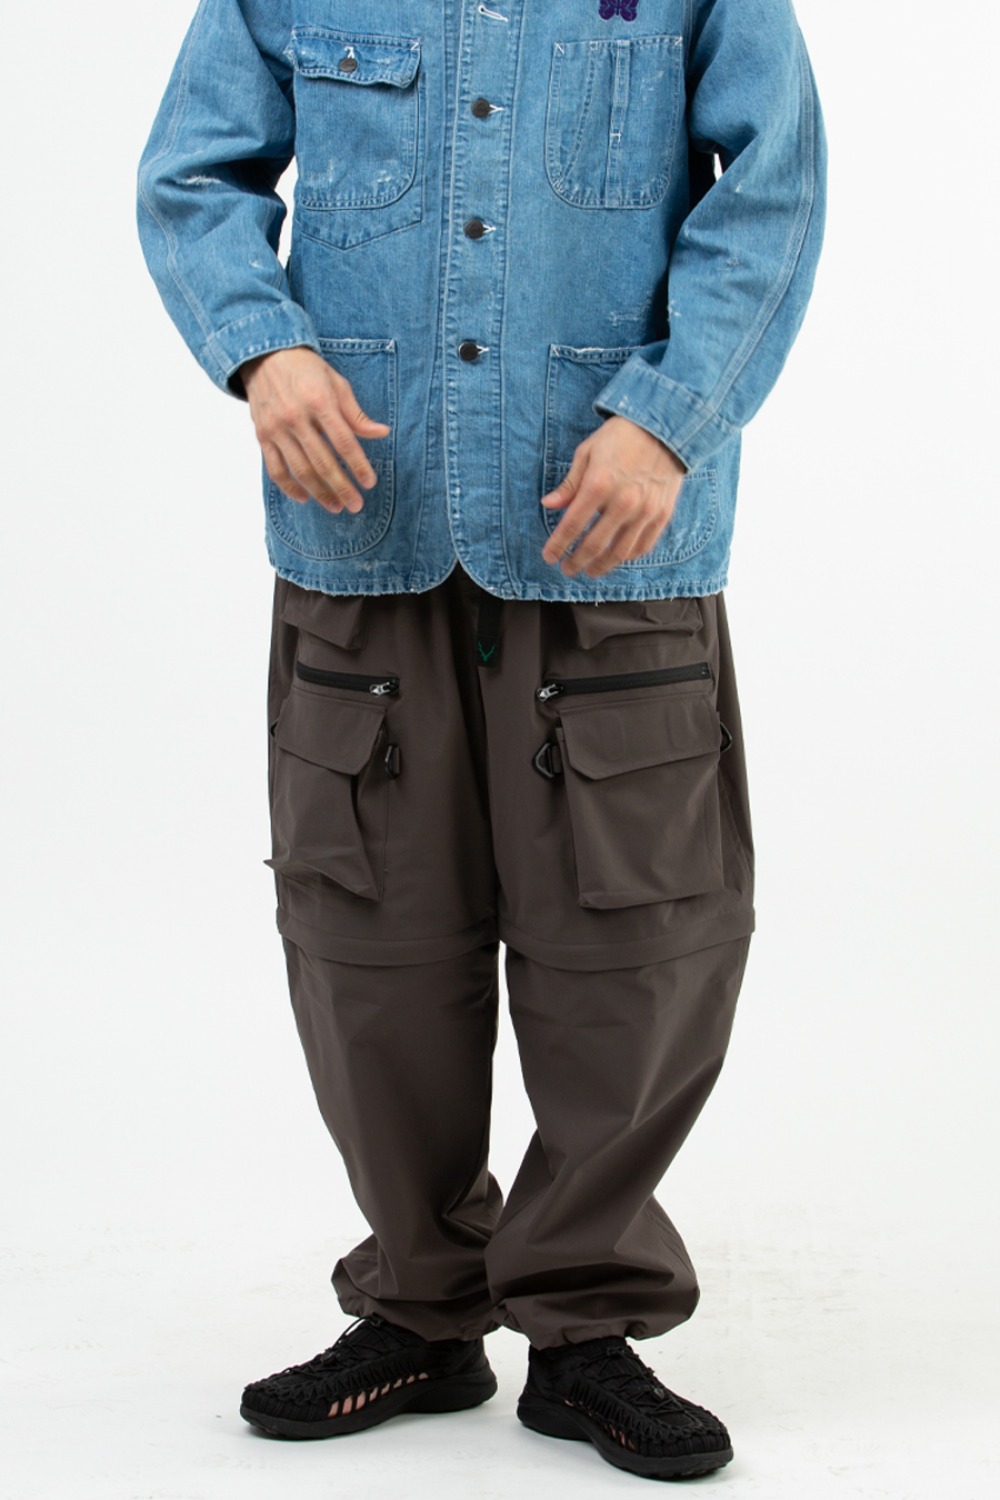 MULTI-POCKET BELTED 2 WAY PANT - POLY RIPSTOP CHARCOAL